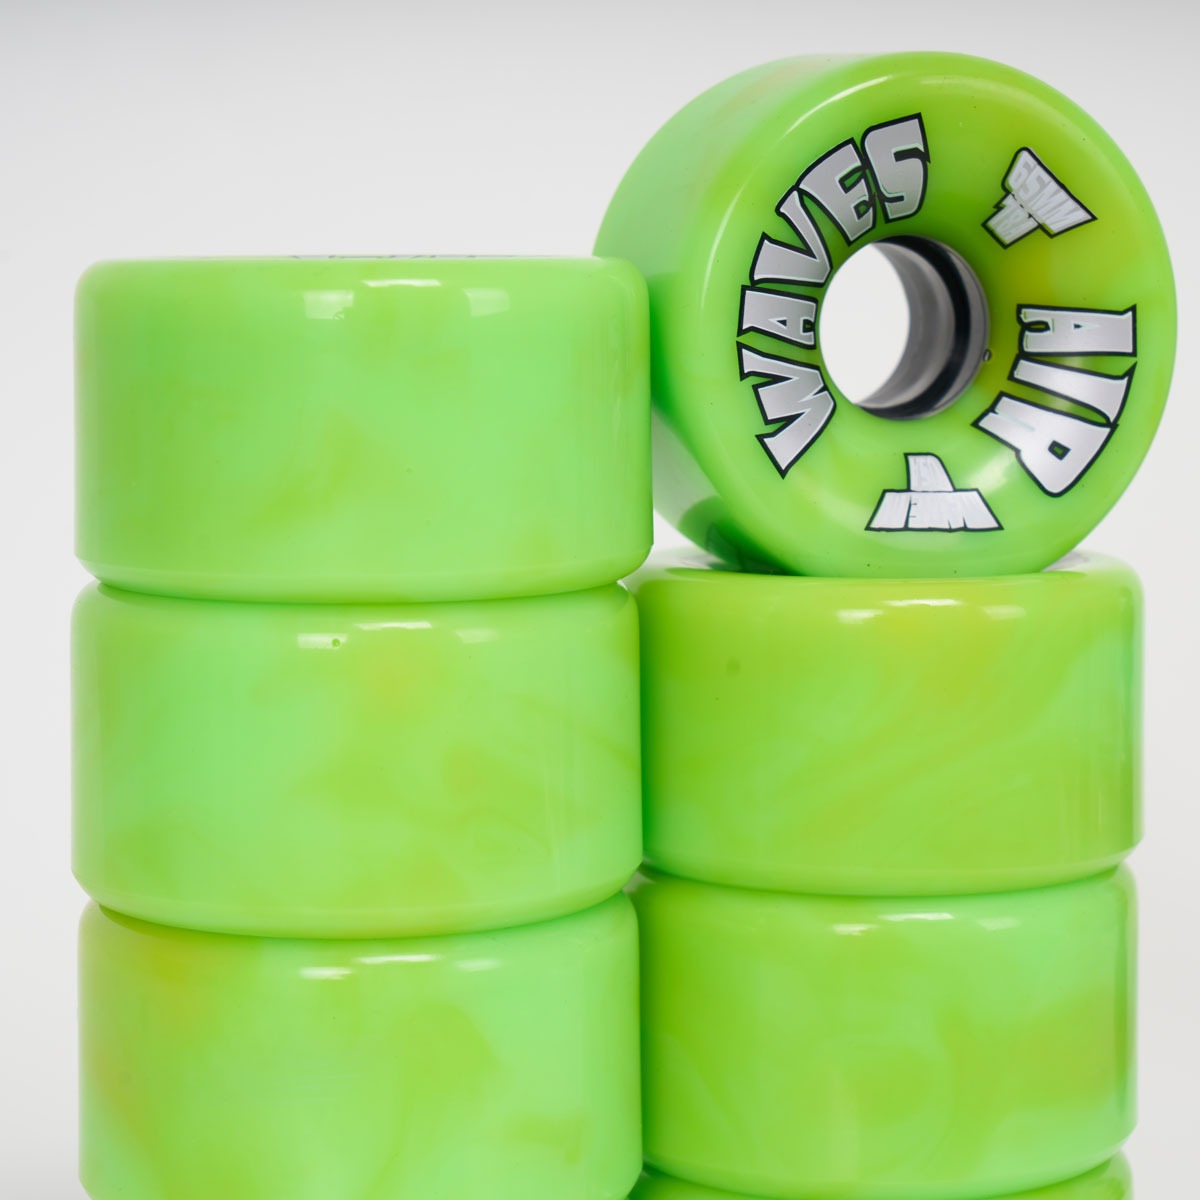 Airwaves 65mm/78a Wheels - Green/Yellow Marble